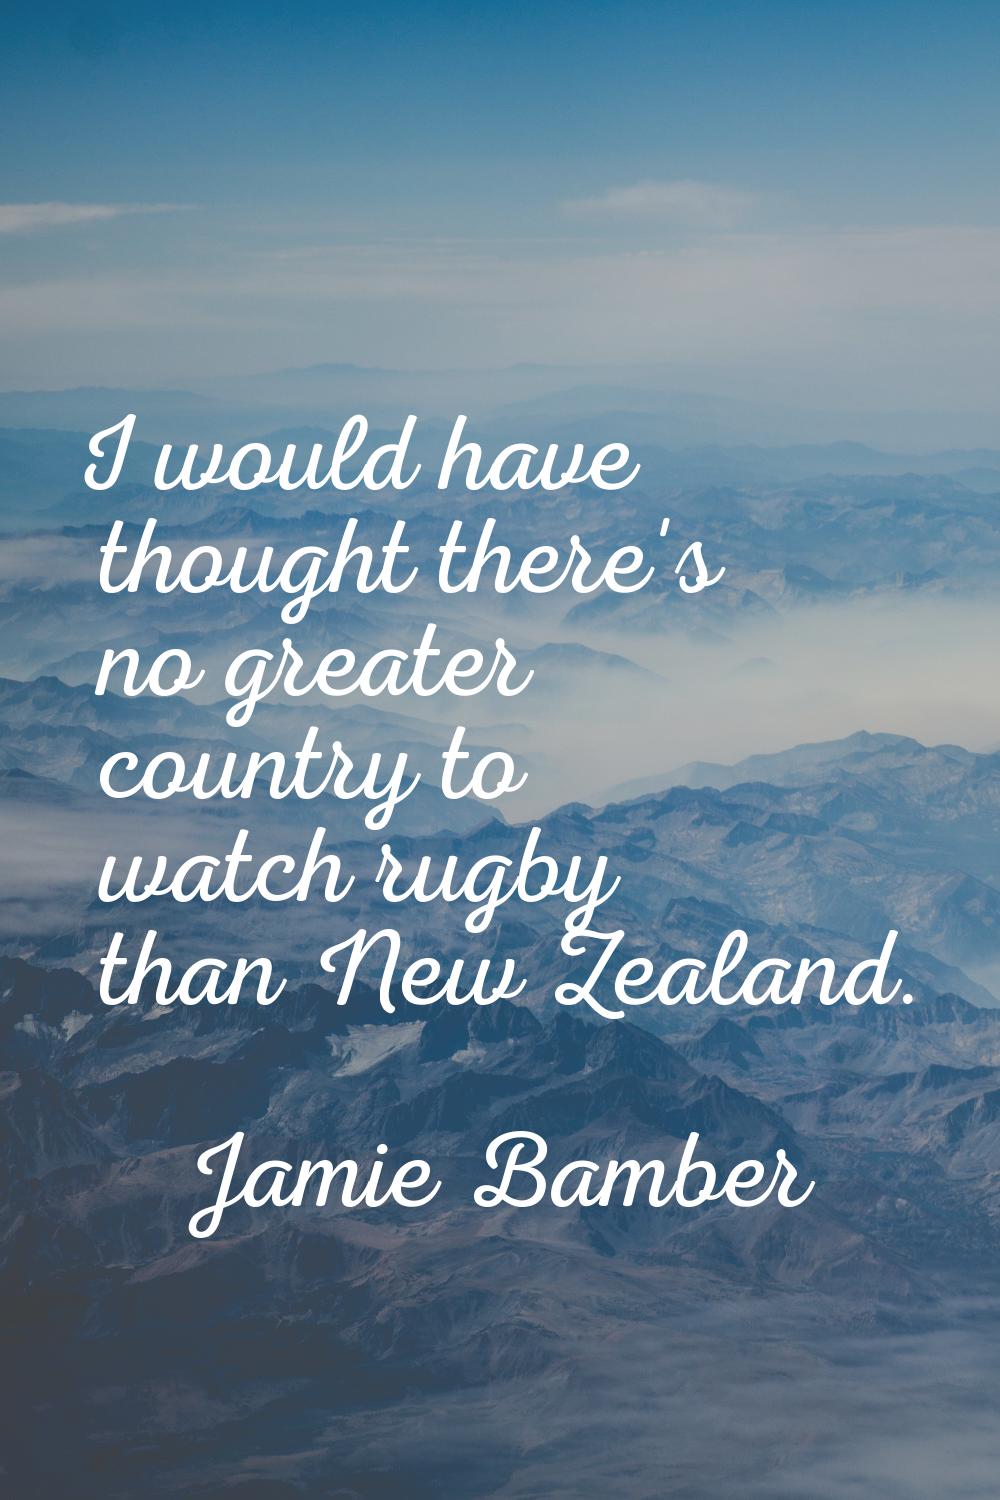 I would have thought there's no greater country to watch rugby than New Zealand.